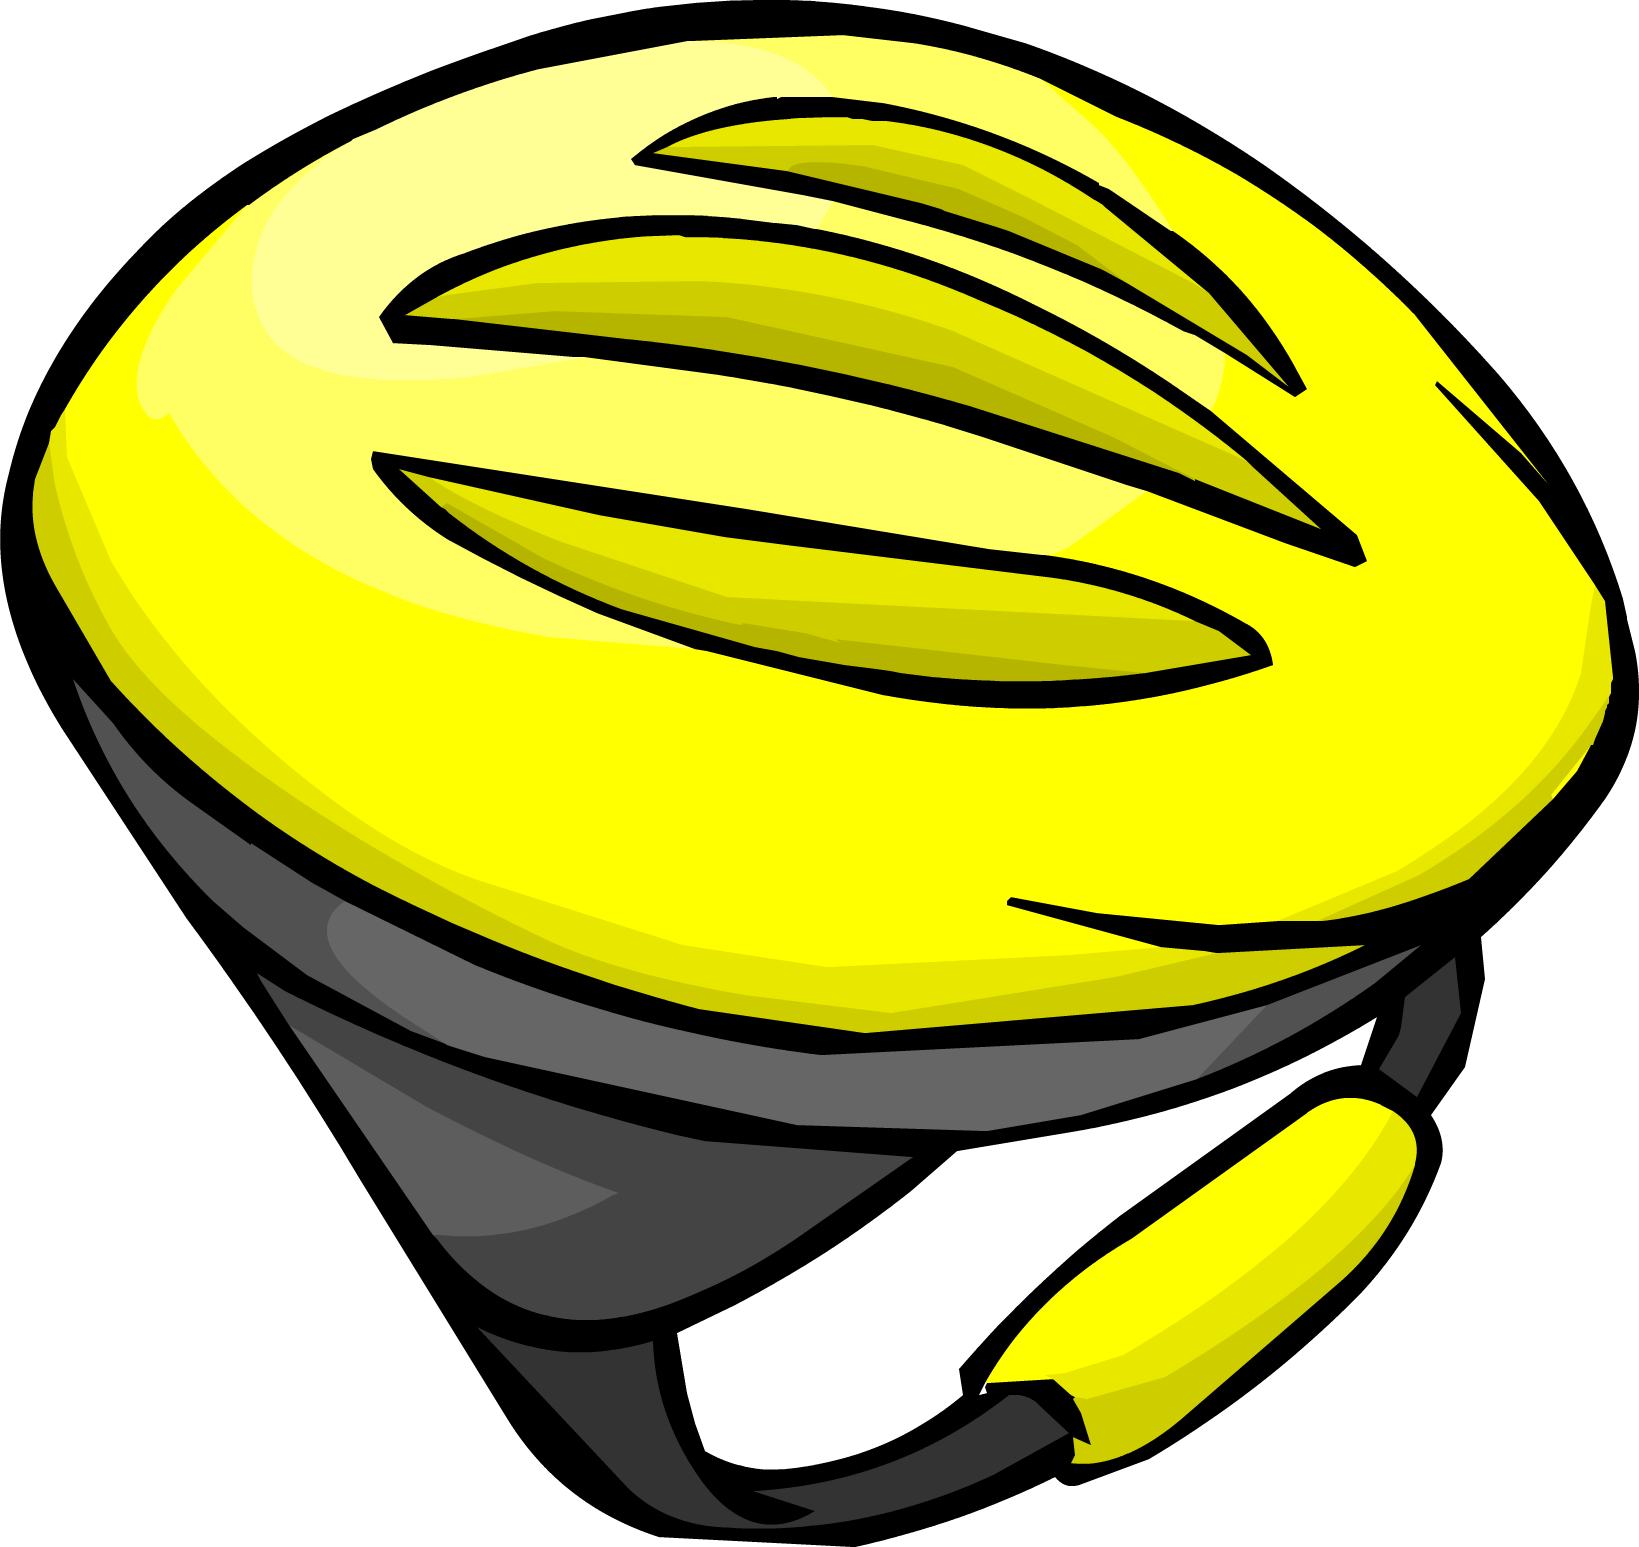 Helm sepeda Clipart PNG